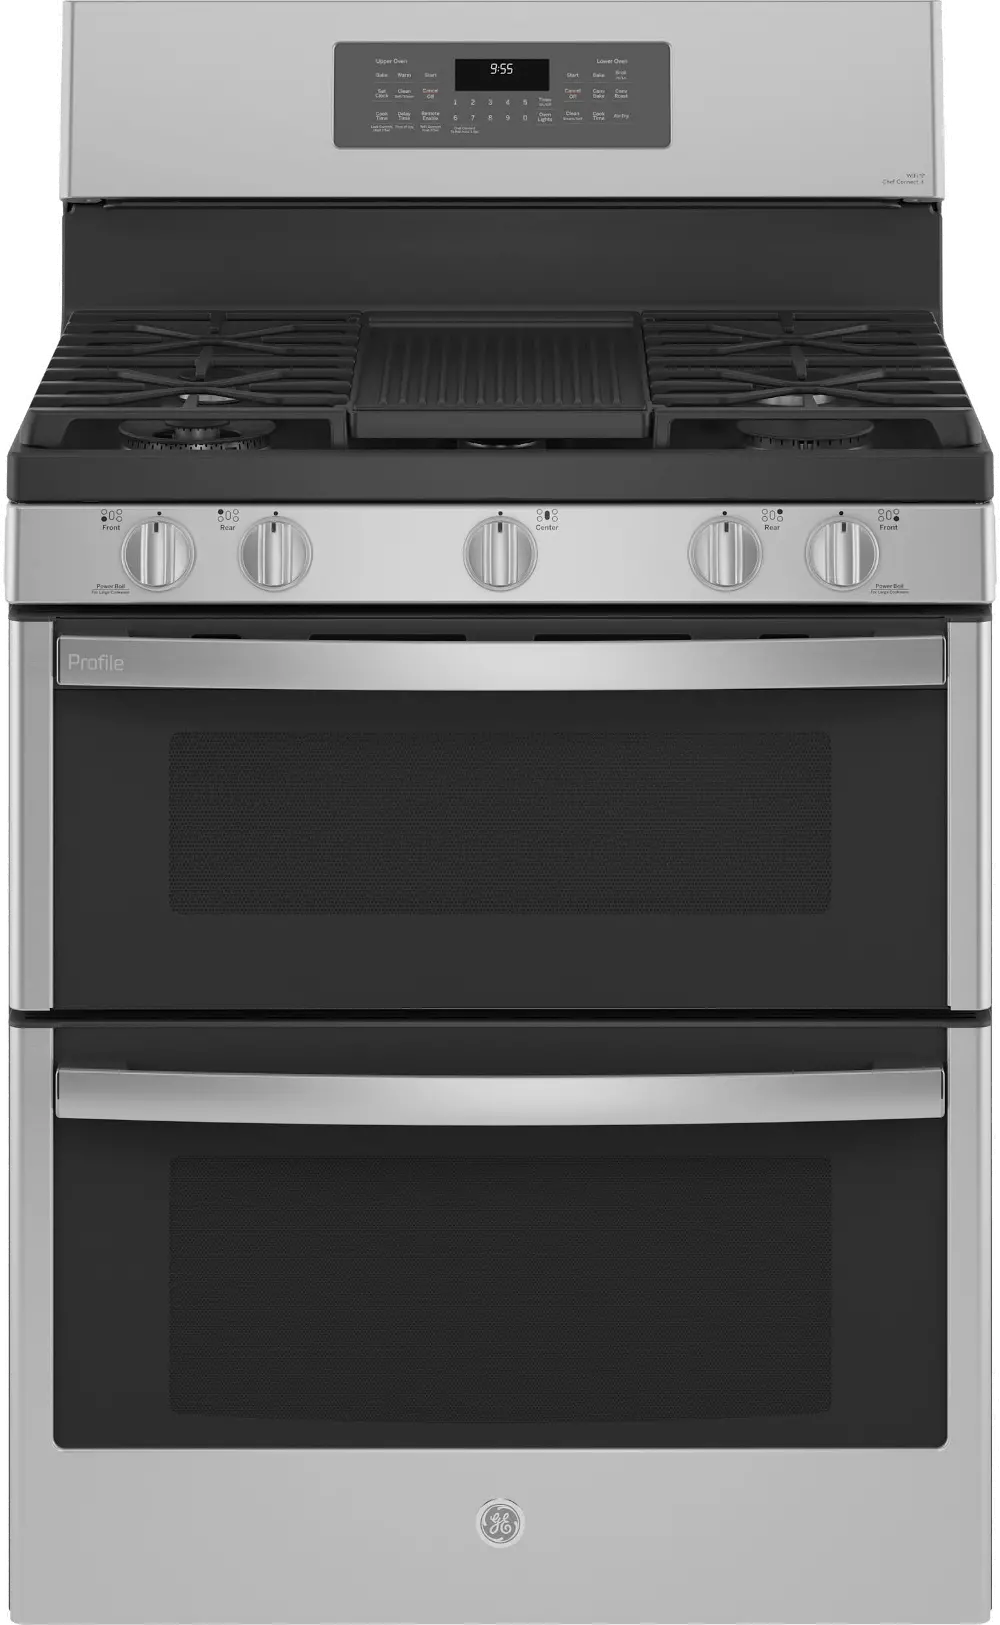 PGB965YPFS GE Profile 6.8 cu ft Double Oven Gas Range - Stainless Steel-1